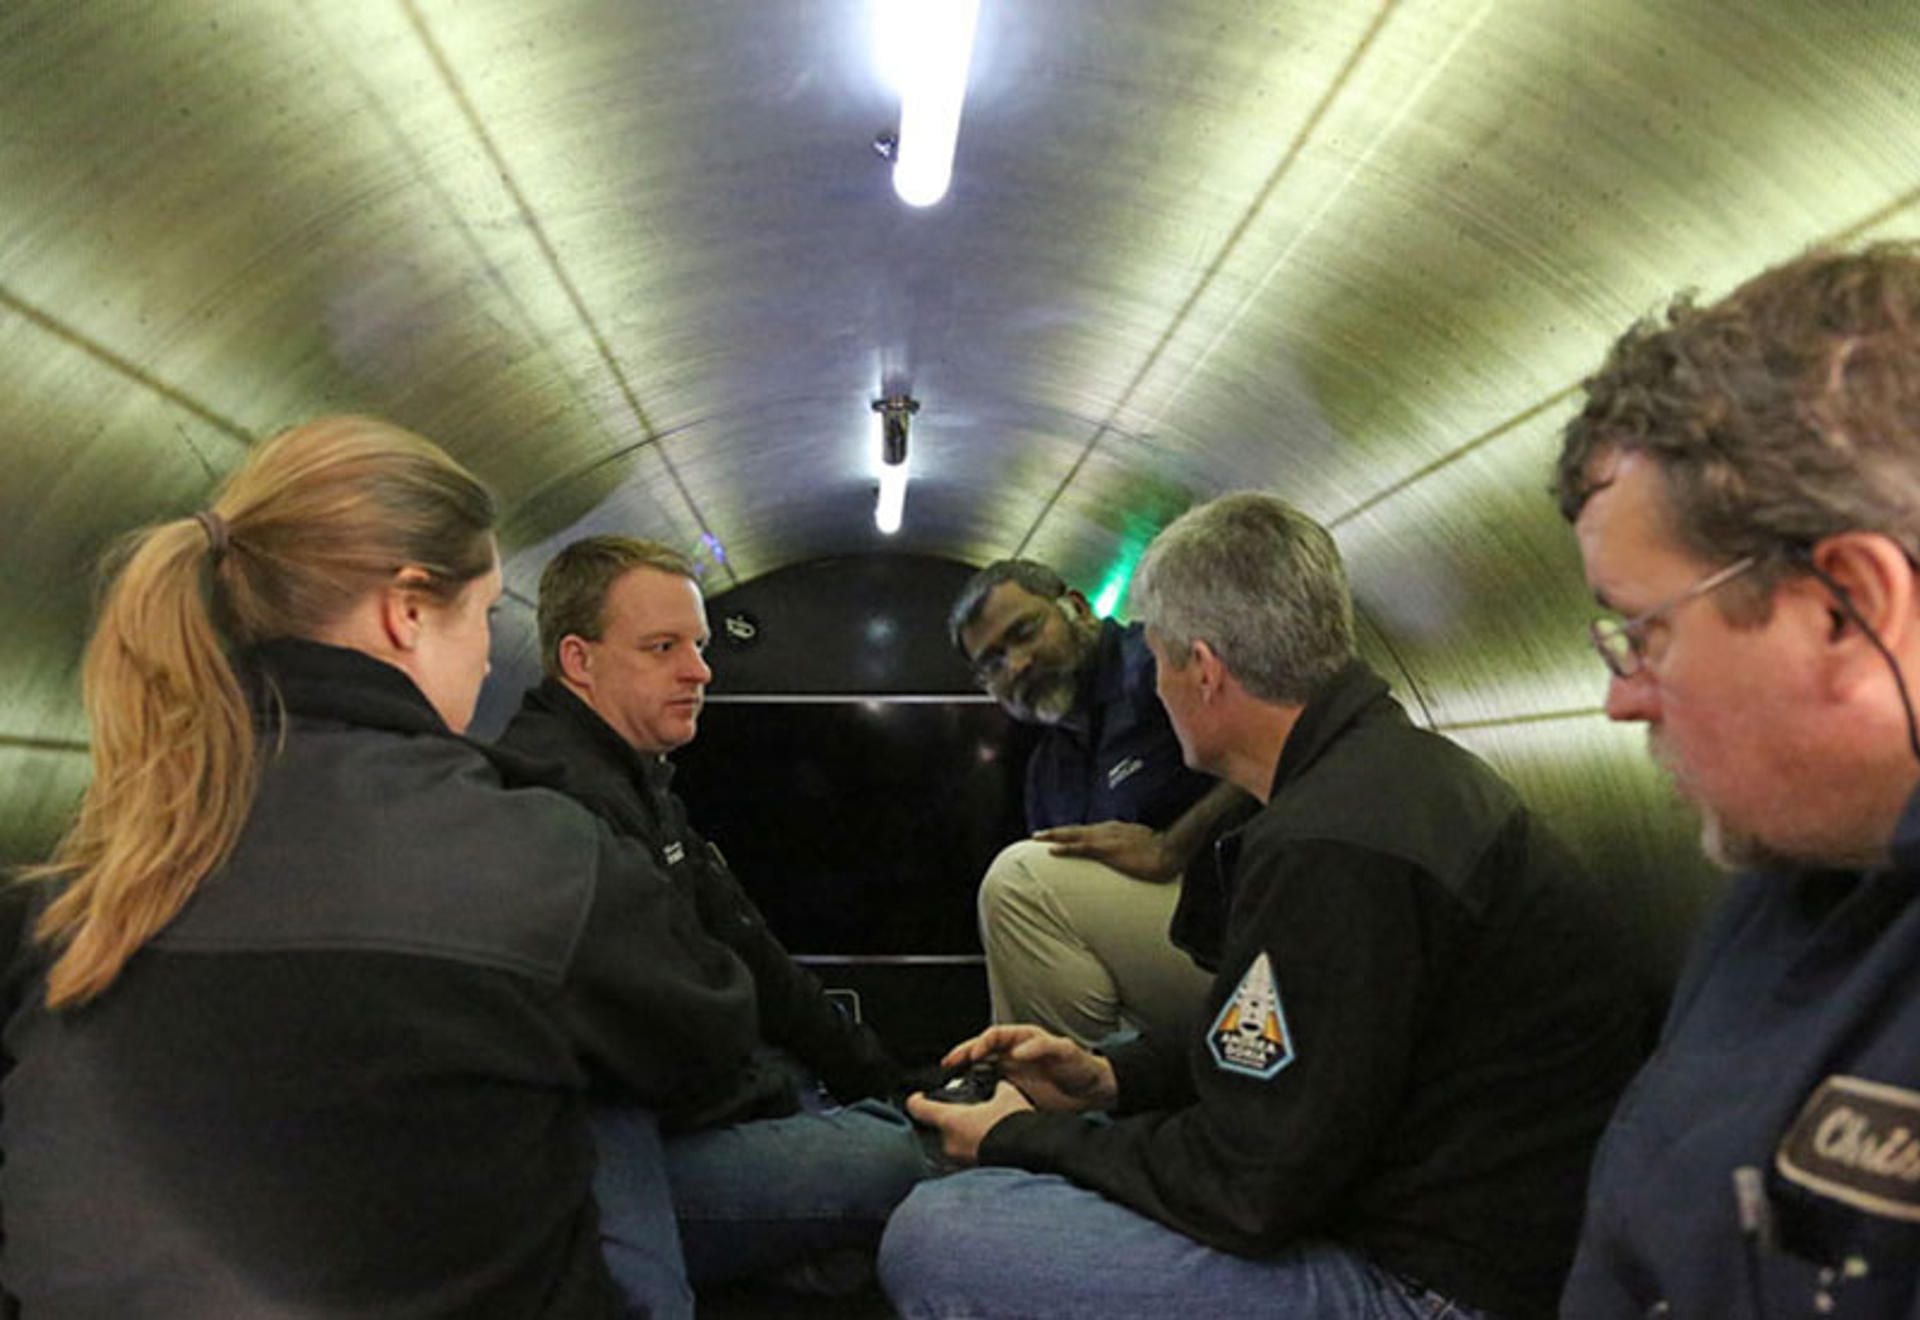 Photo provided by OceanGate showing the interior of the Titan submarine.  (EFE/OceanGate).